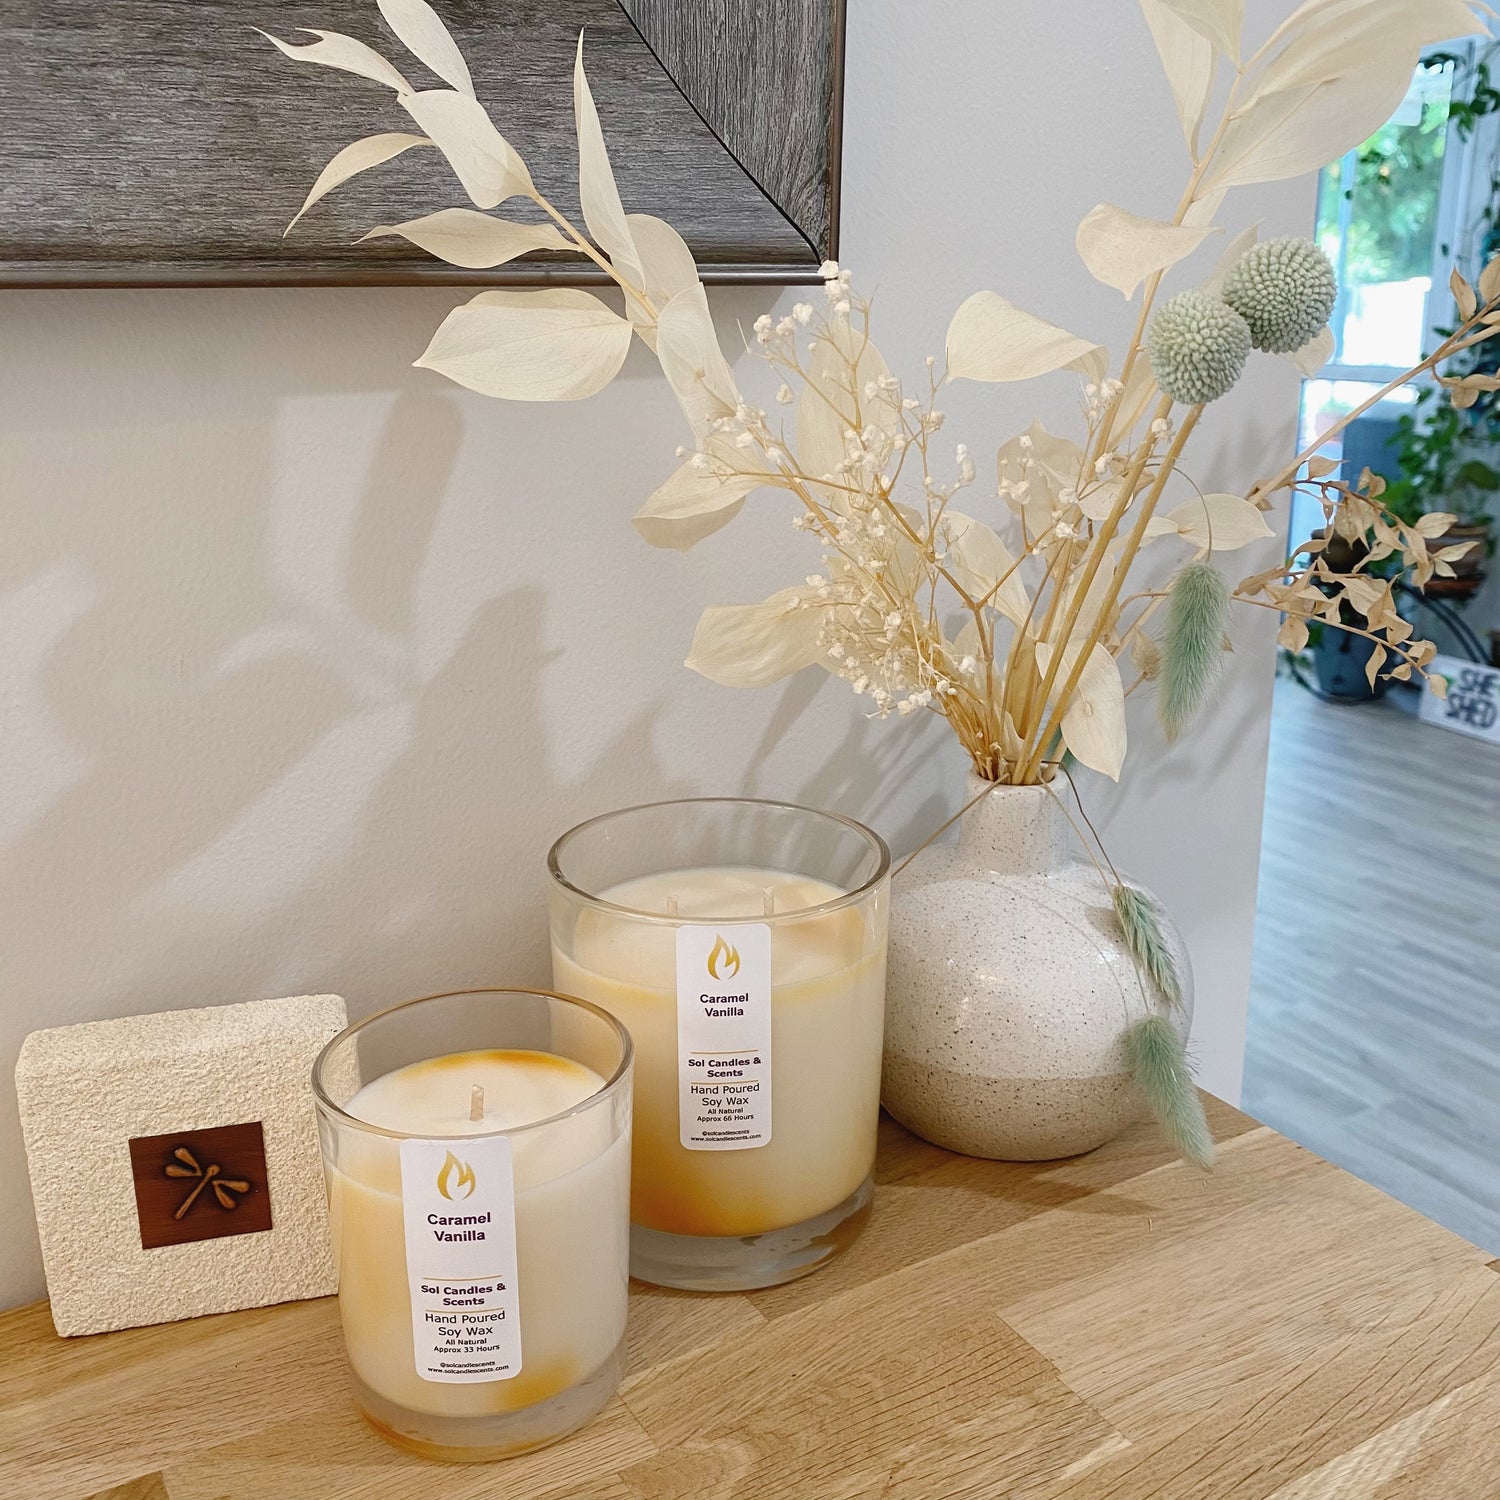 Caramel Vanilla Soy Candle_Sol Candles & Scents